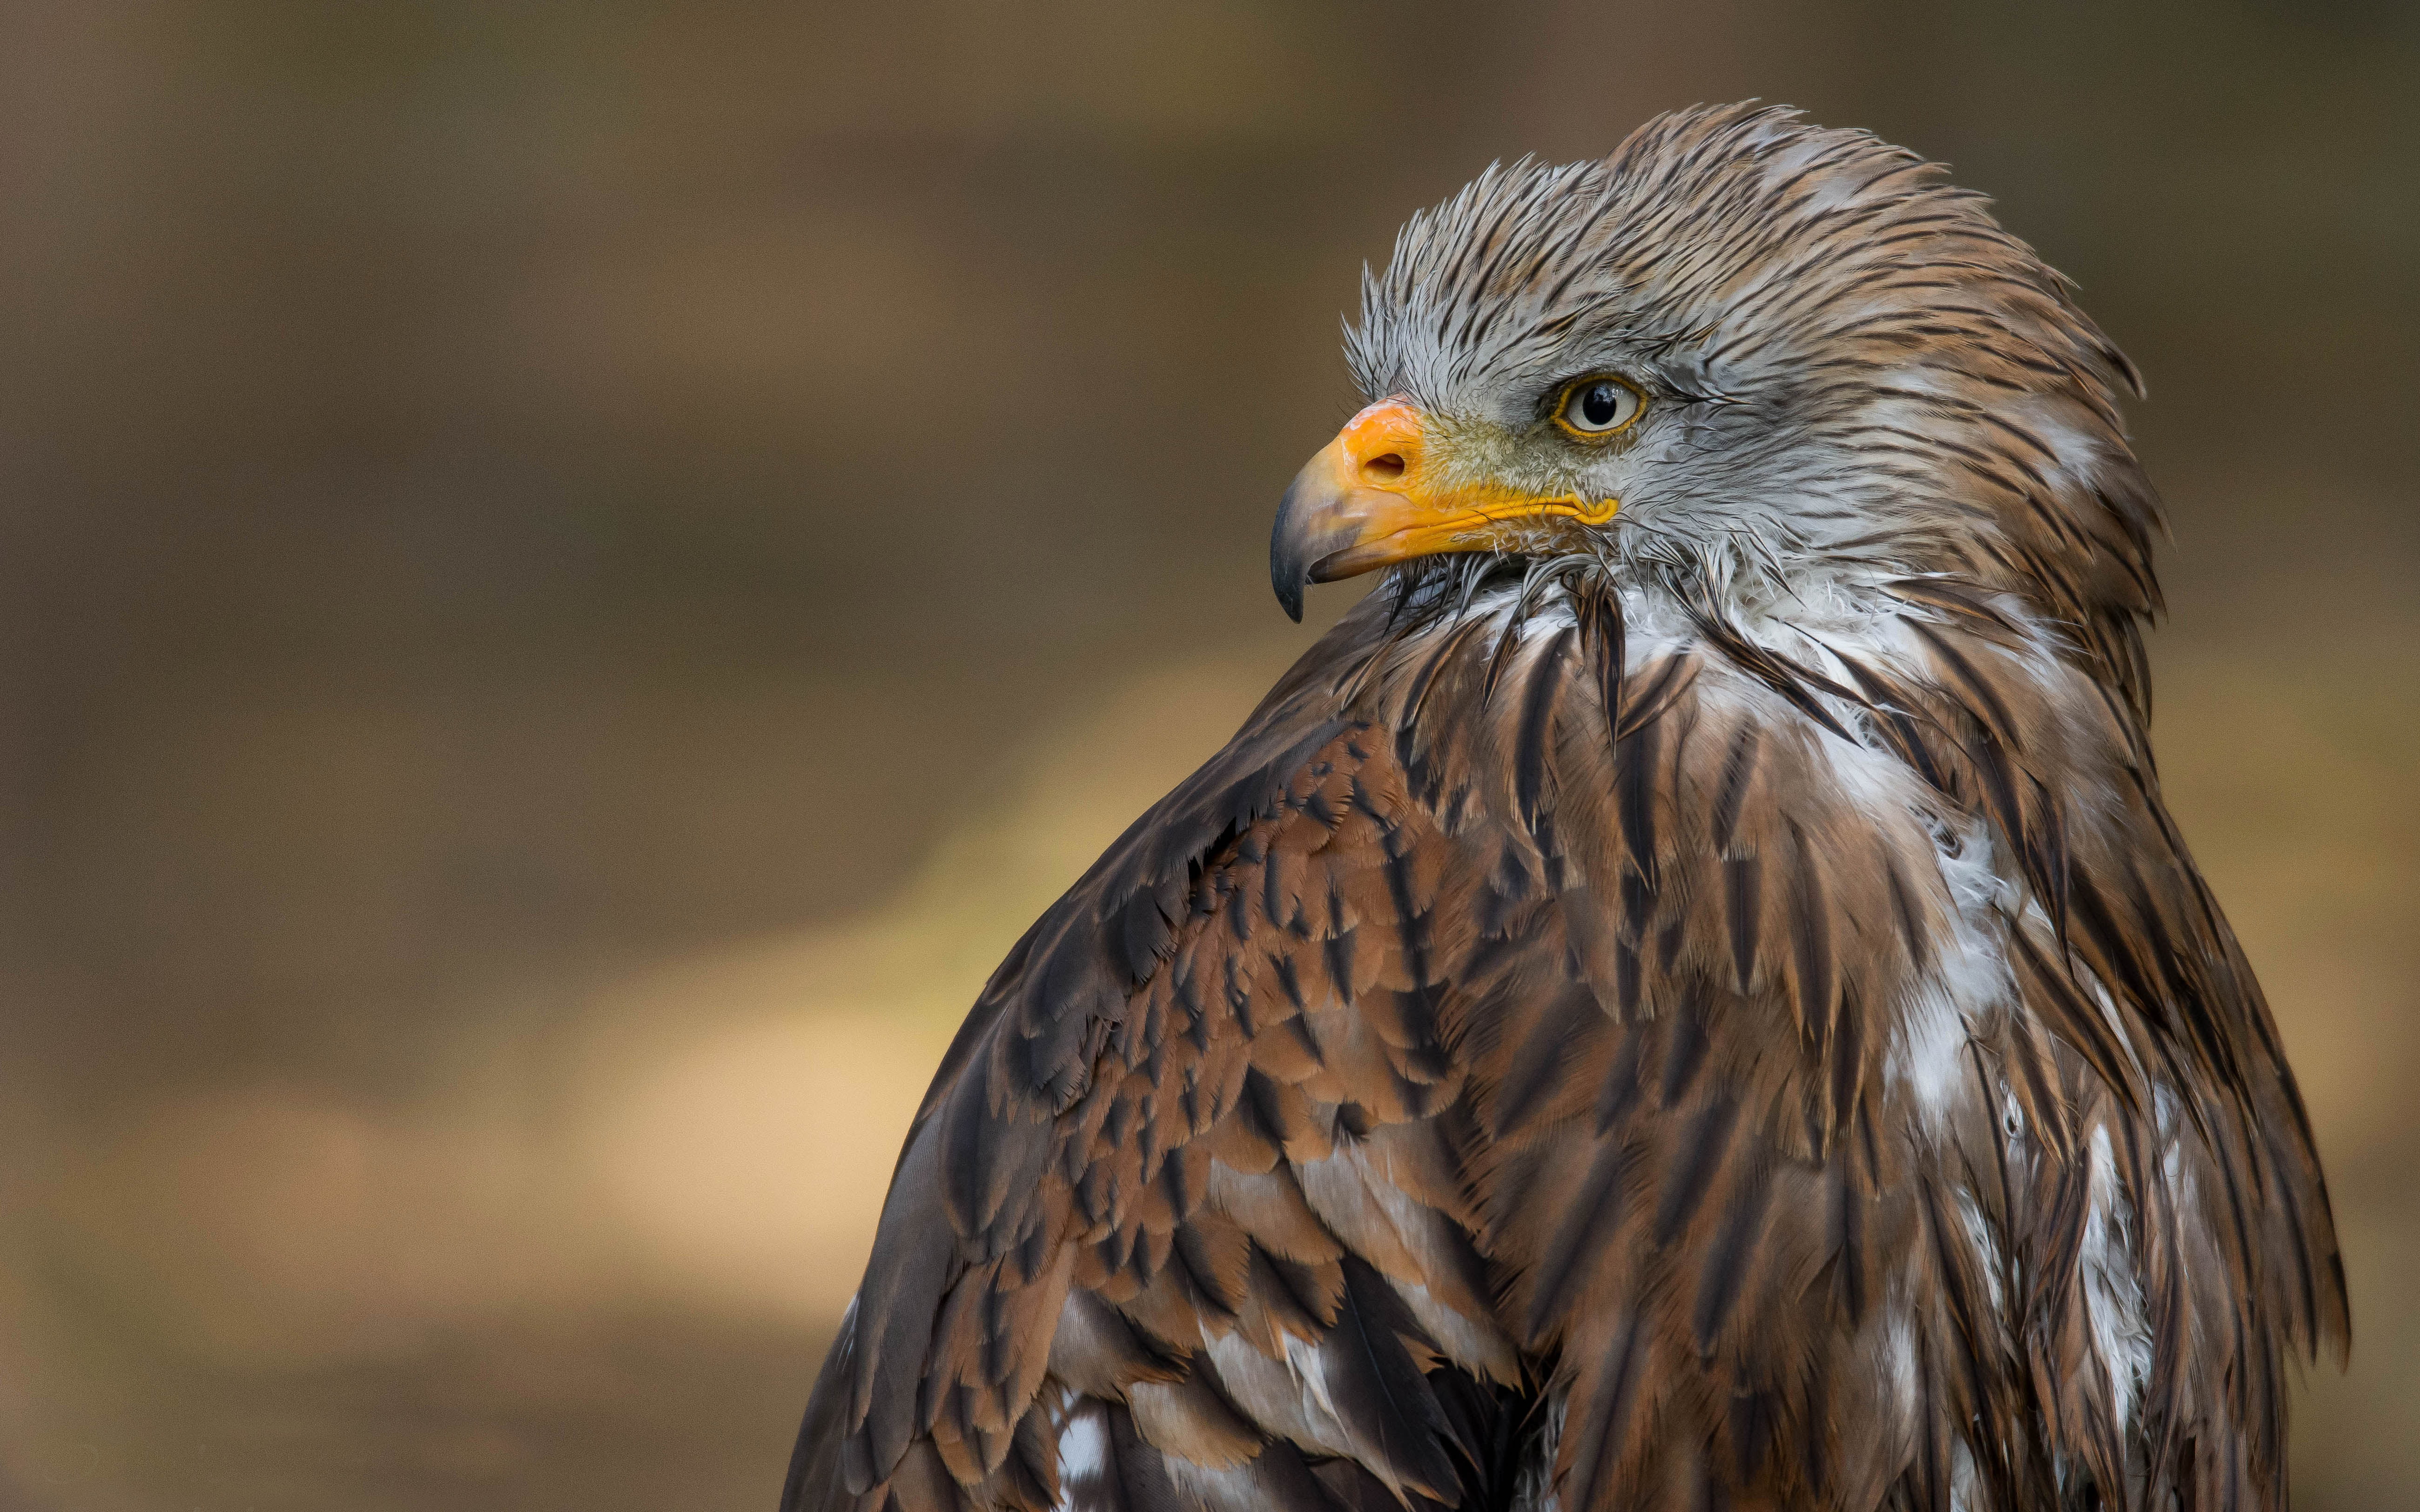 Red Dragon (milvus Milvus), Also Red Hawk Kites Large Bird Of Prey Of The Family Accipitridae Desktop Hd Wallpapers For Mobile Phones And Computer 5200×3250